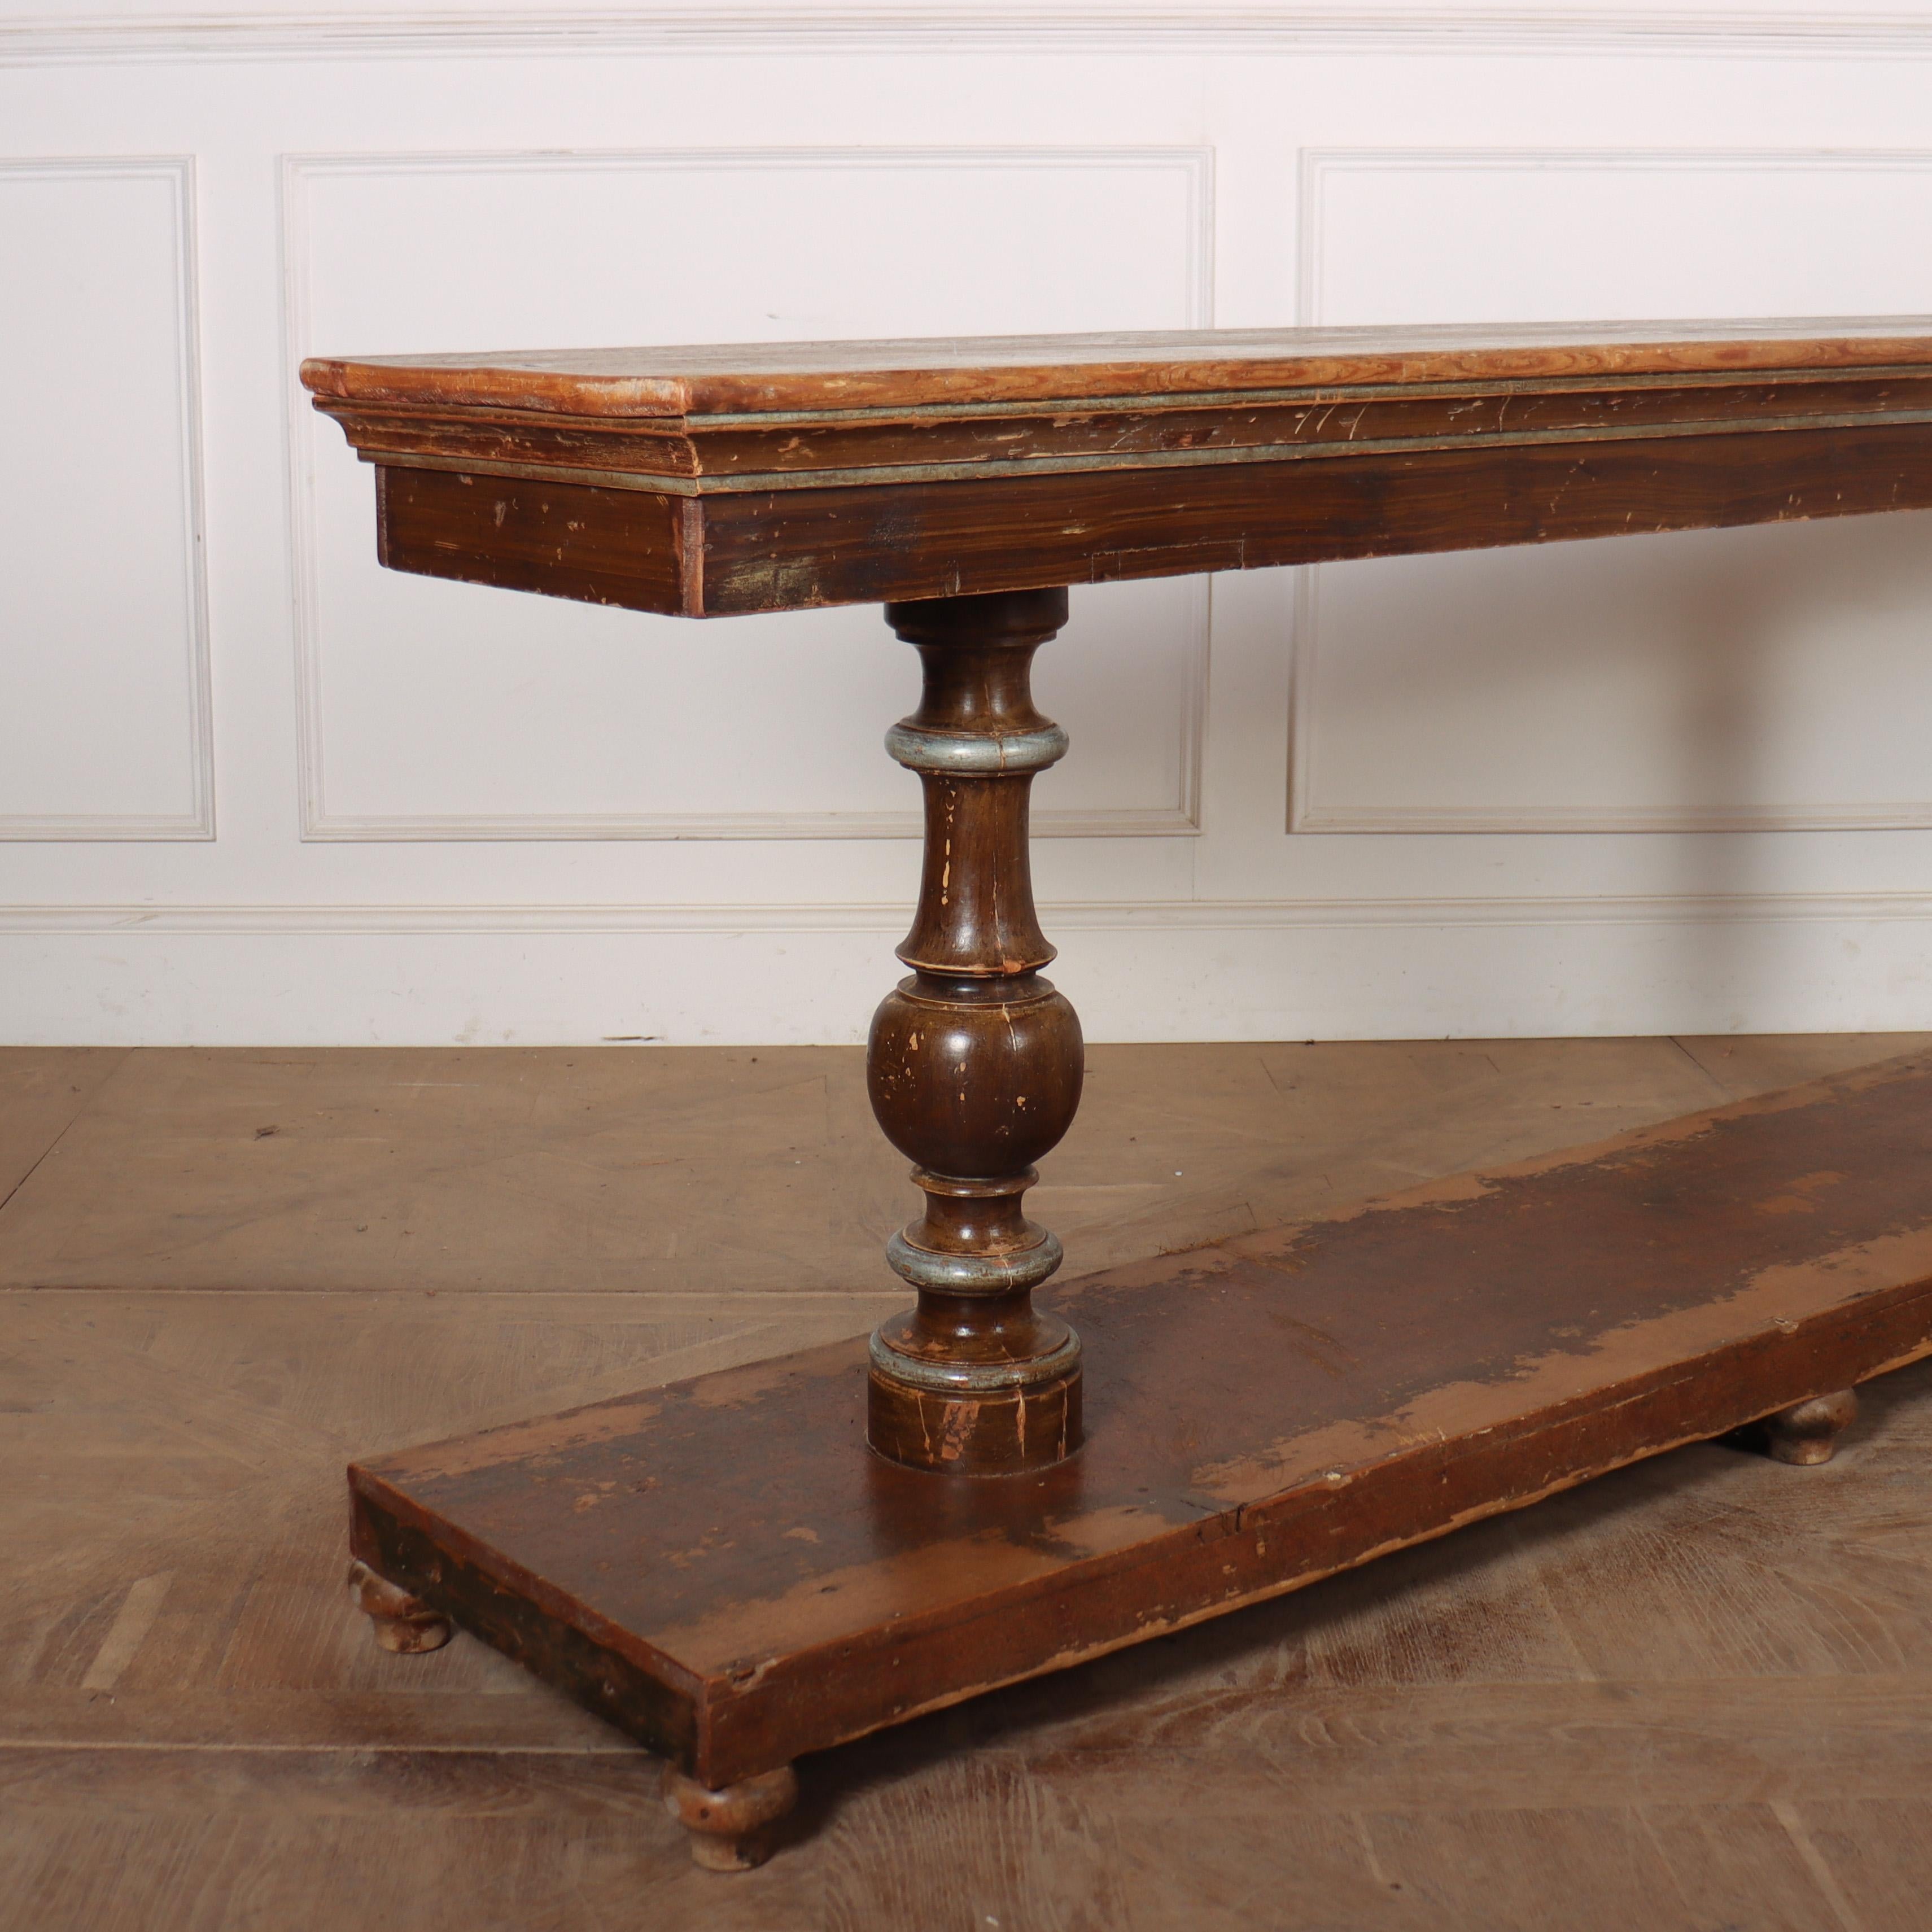 Good 19th C Italian original painted console table. Lovely mellow pine top. 1840.

Reference: 8327

Dimensions
84 inches (213 cms) Wide
18 inches (46 cms) Deep
35 inches (89 cms) High